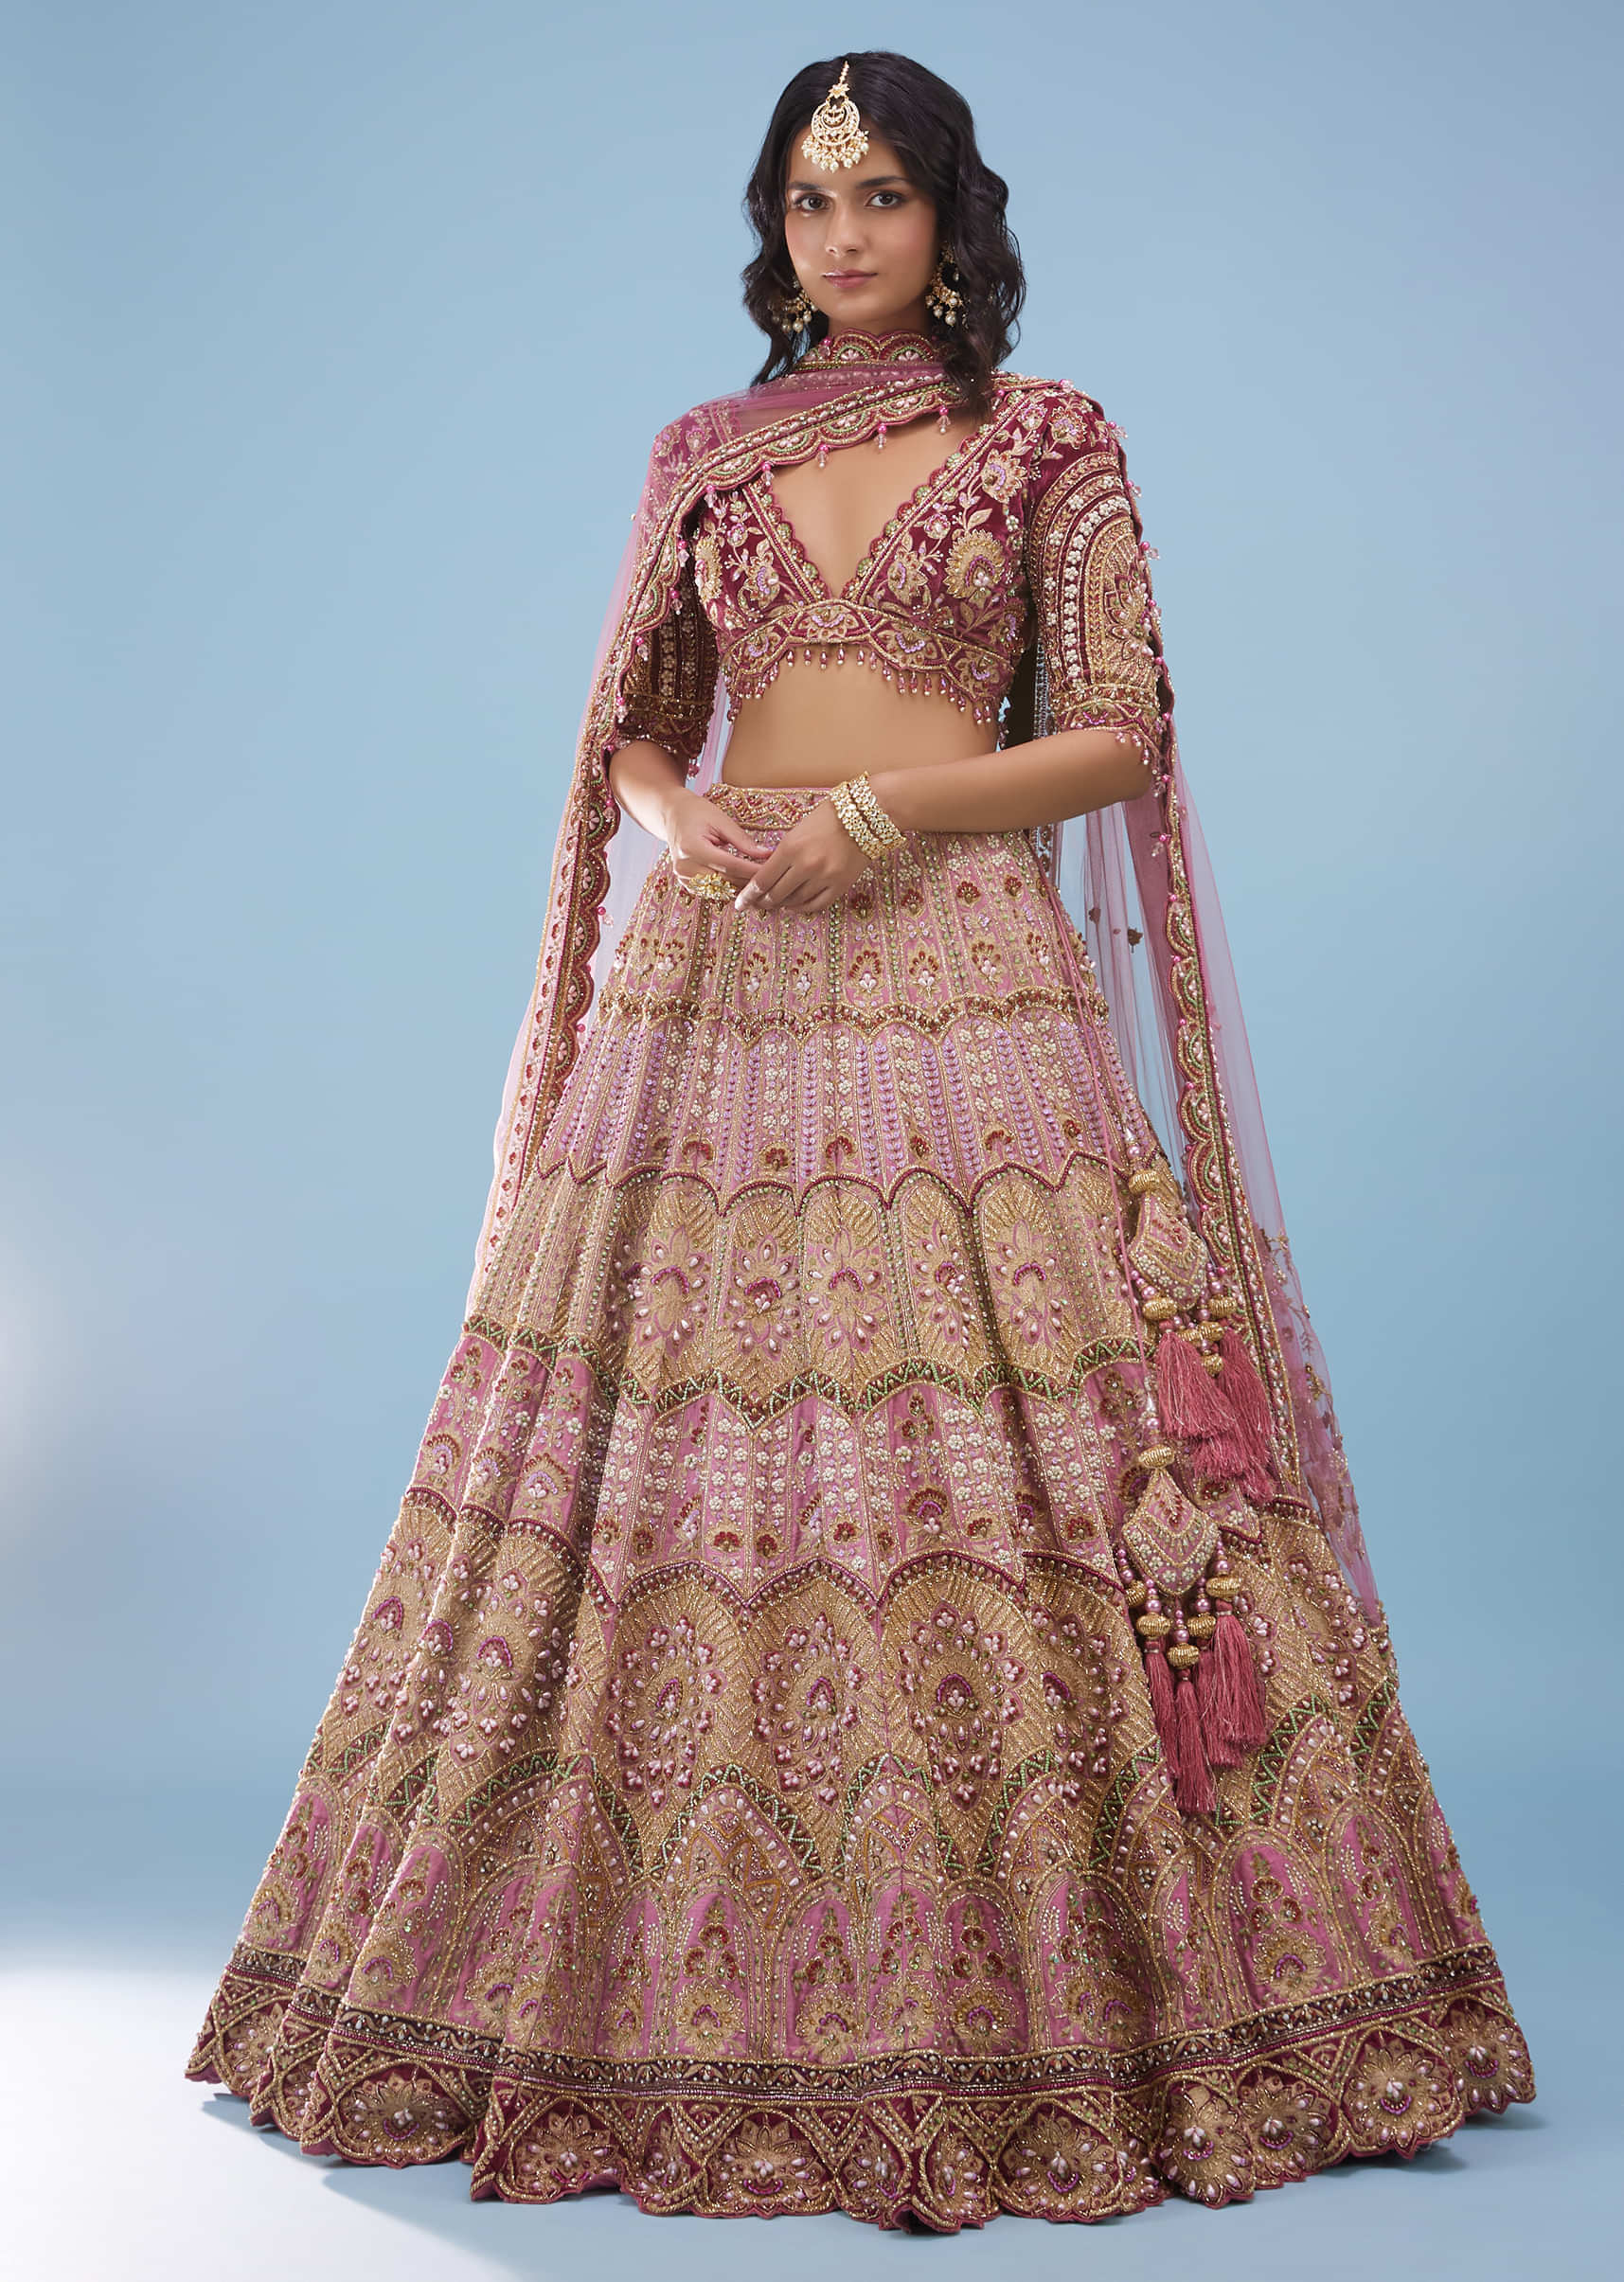 Kalki Cashmere Rose Pink Junoesque Bridal Lehenga In Raw Silk With Heavy Embroidery - NOOR 2022